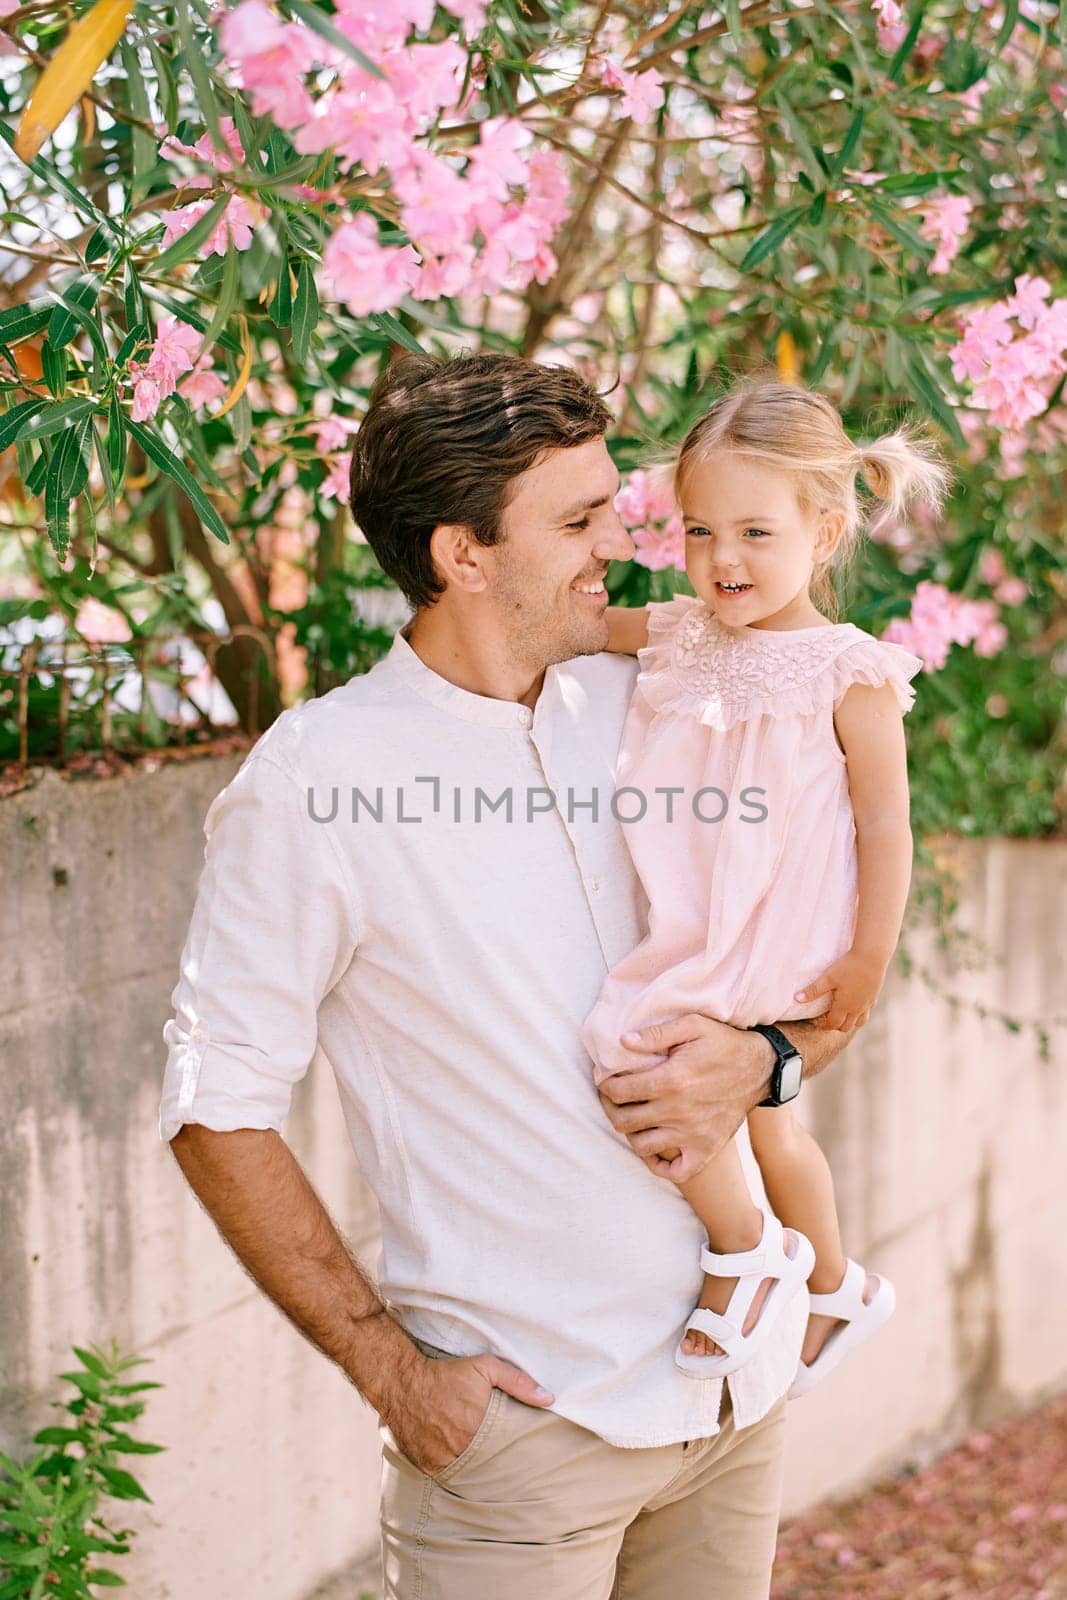 Smiling dad with a little girl in his arms stands near a flowering tree in the garden by Nadtochiy